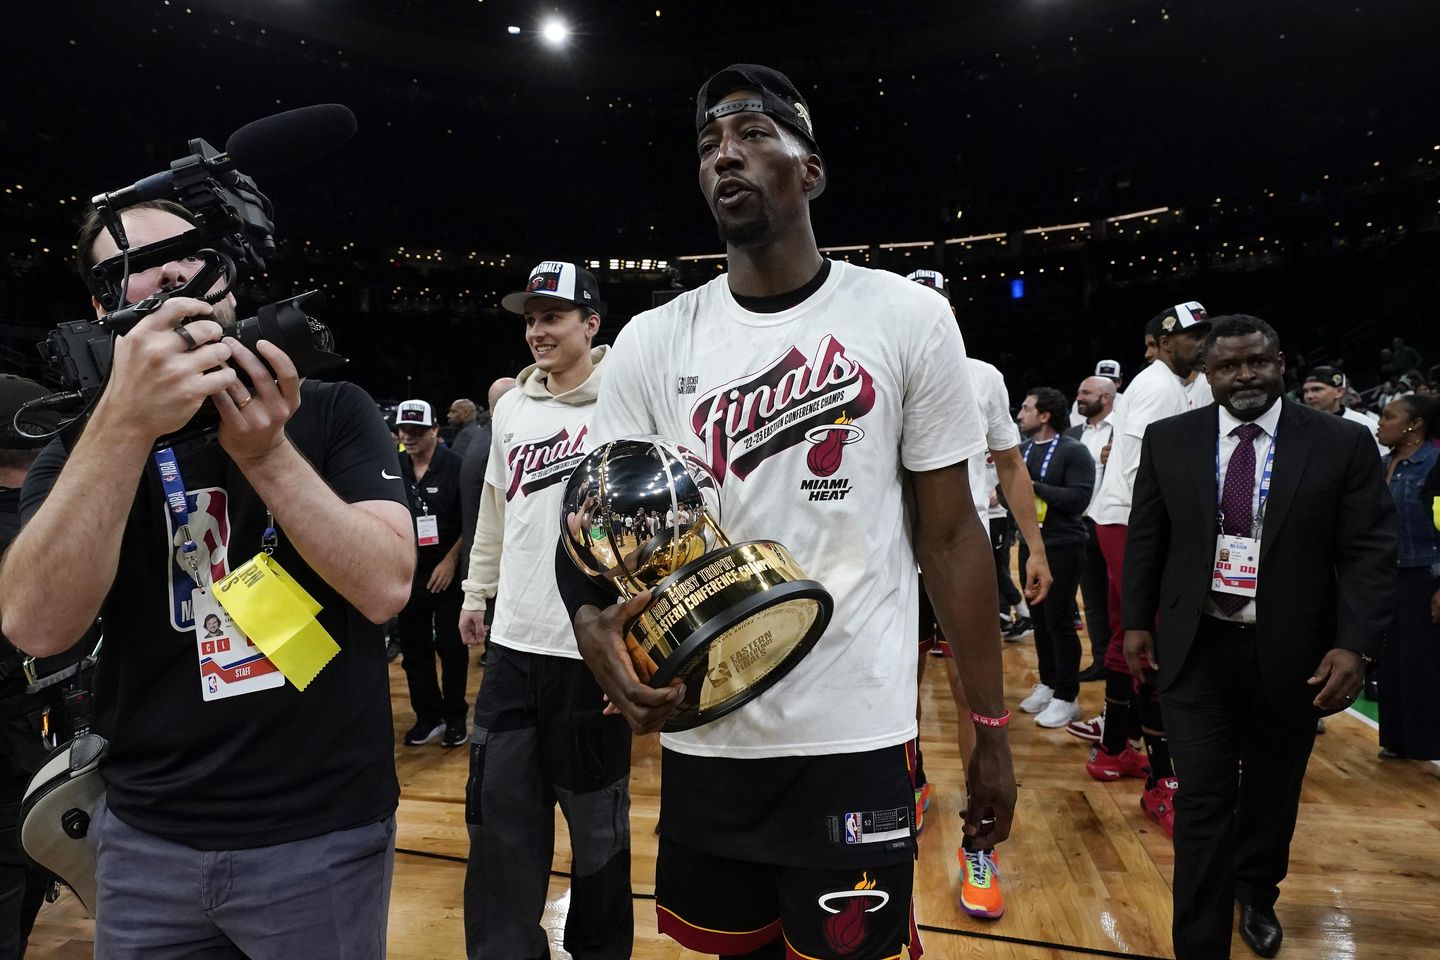 Game 7 of Heat-Celtic series rates No. 3 among TNTs watched NBA games